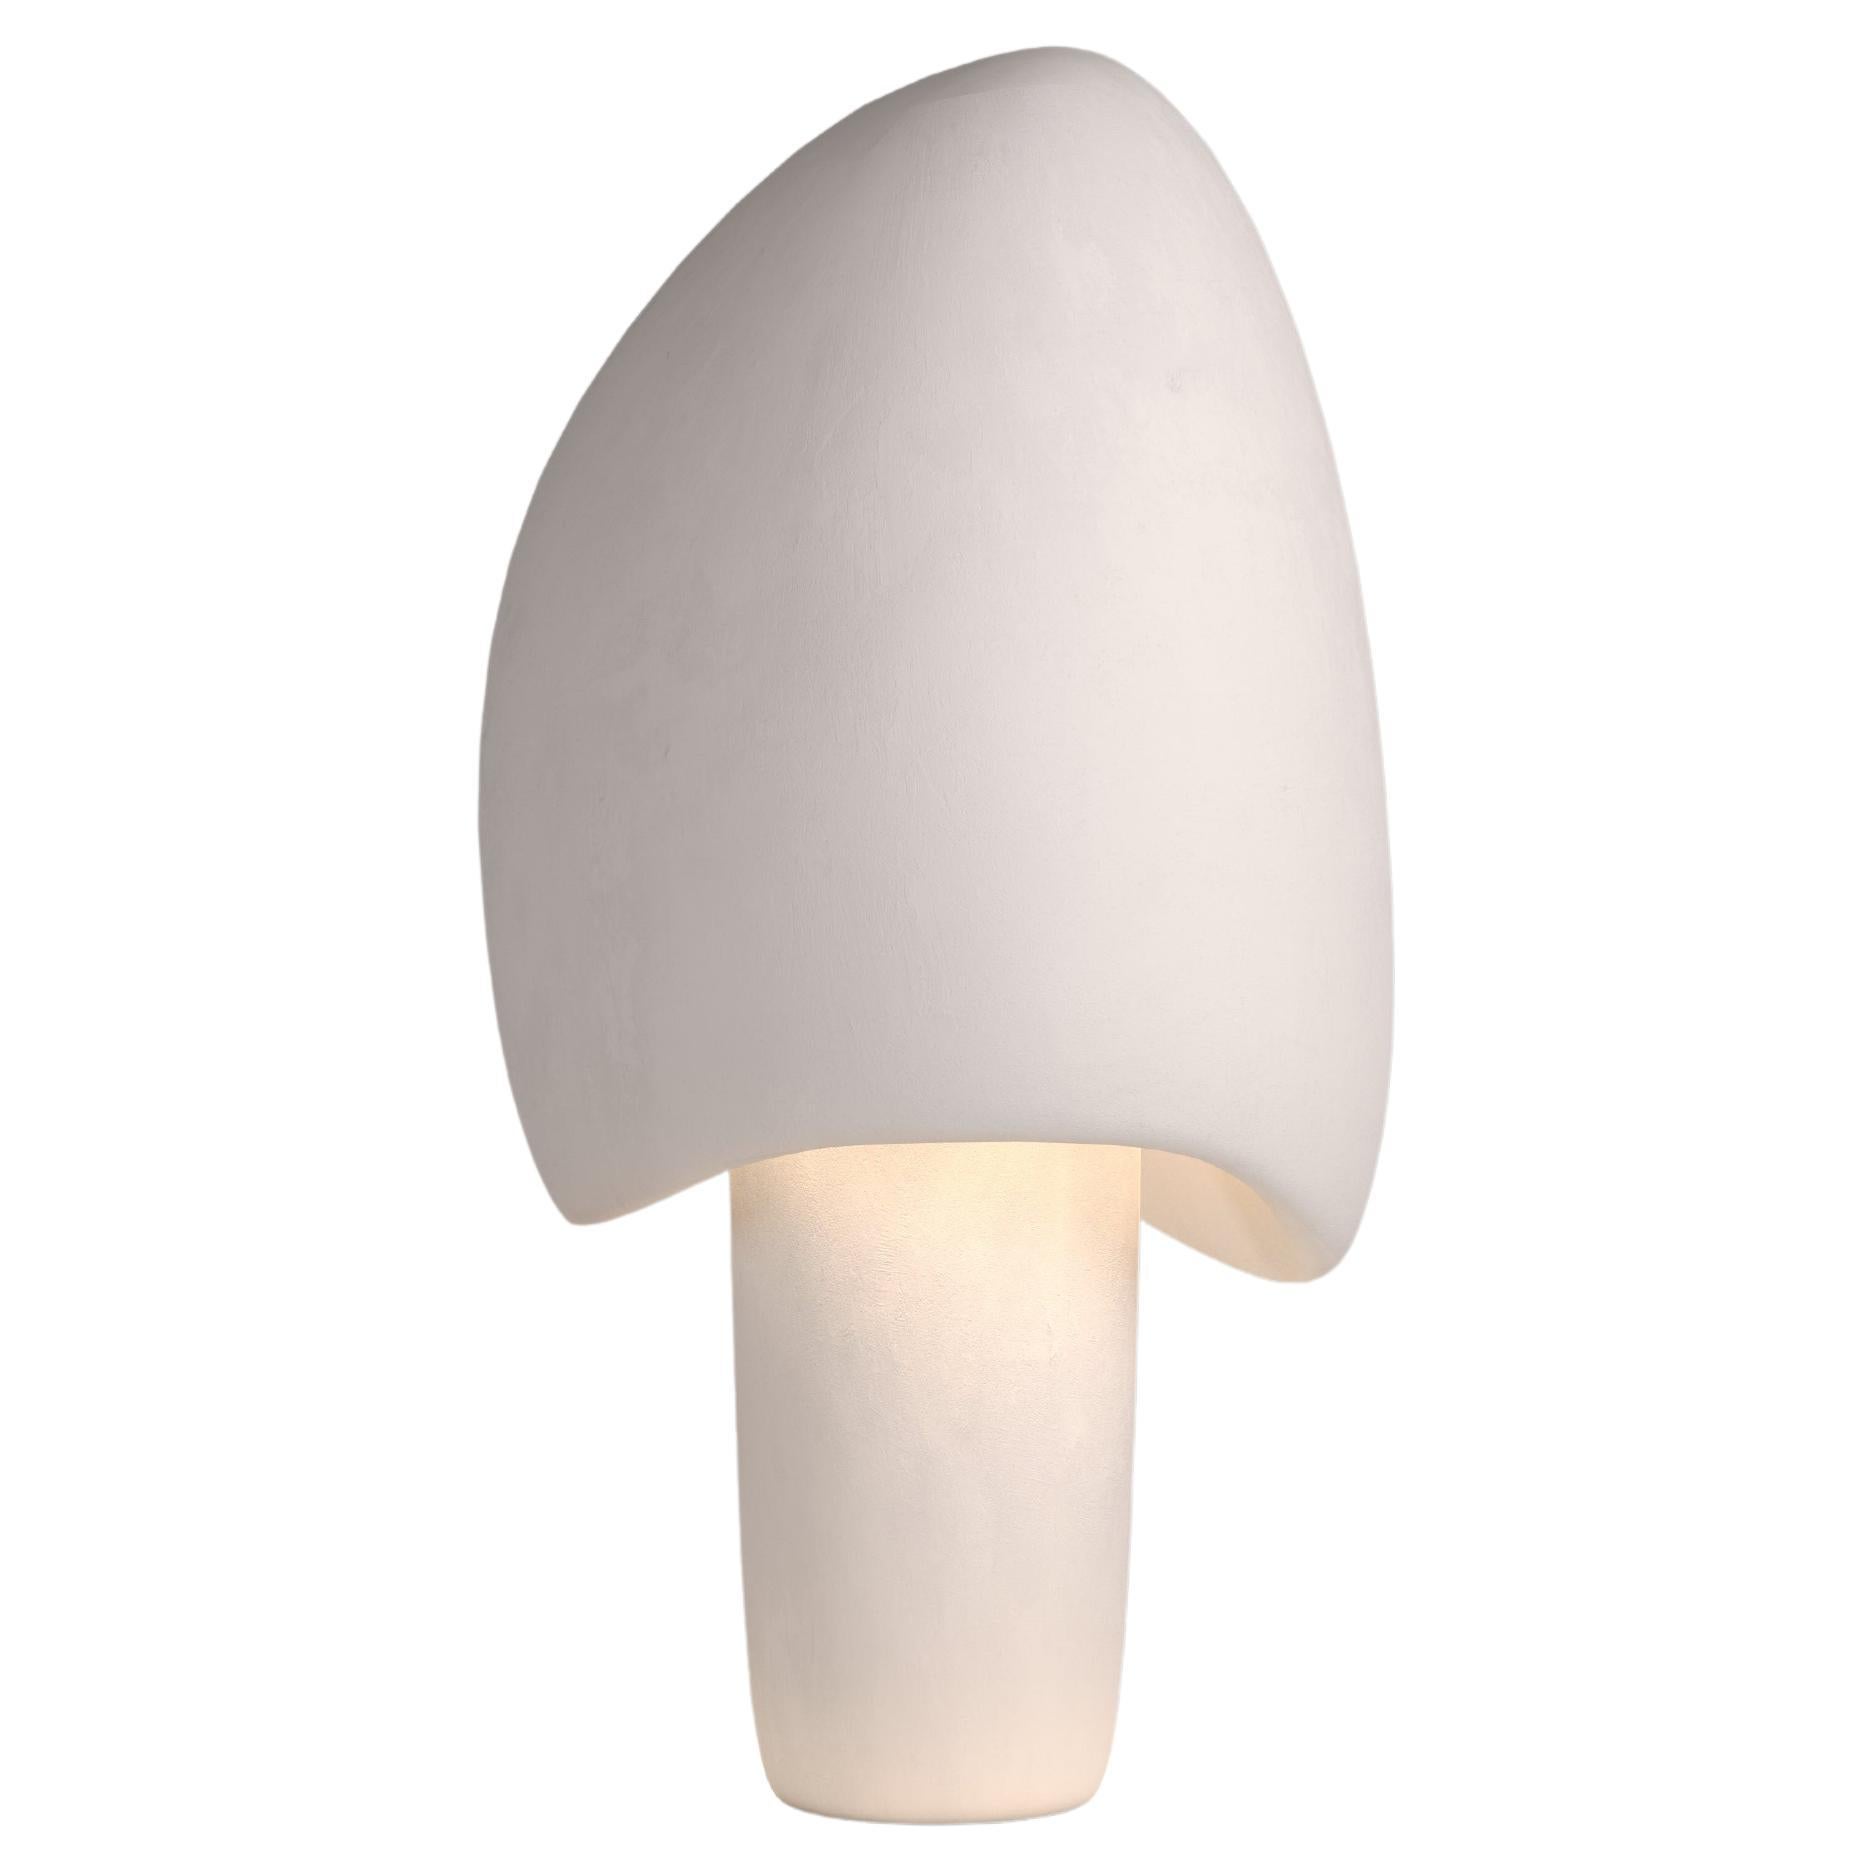 Craft Lamp MUSHROOM "LEHIT" Collection by MAKHNO For Sale